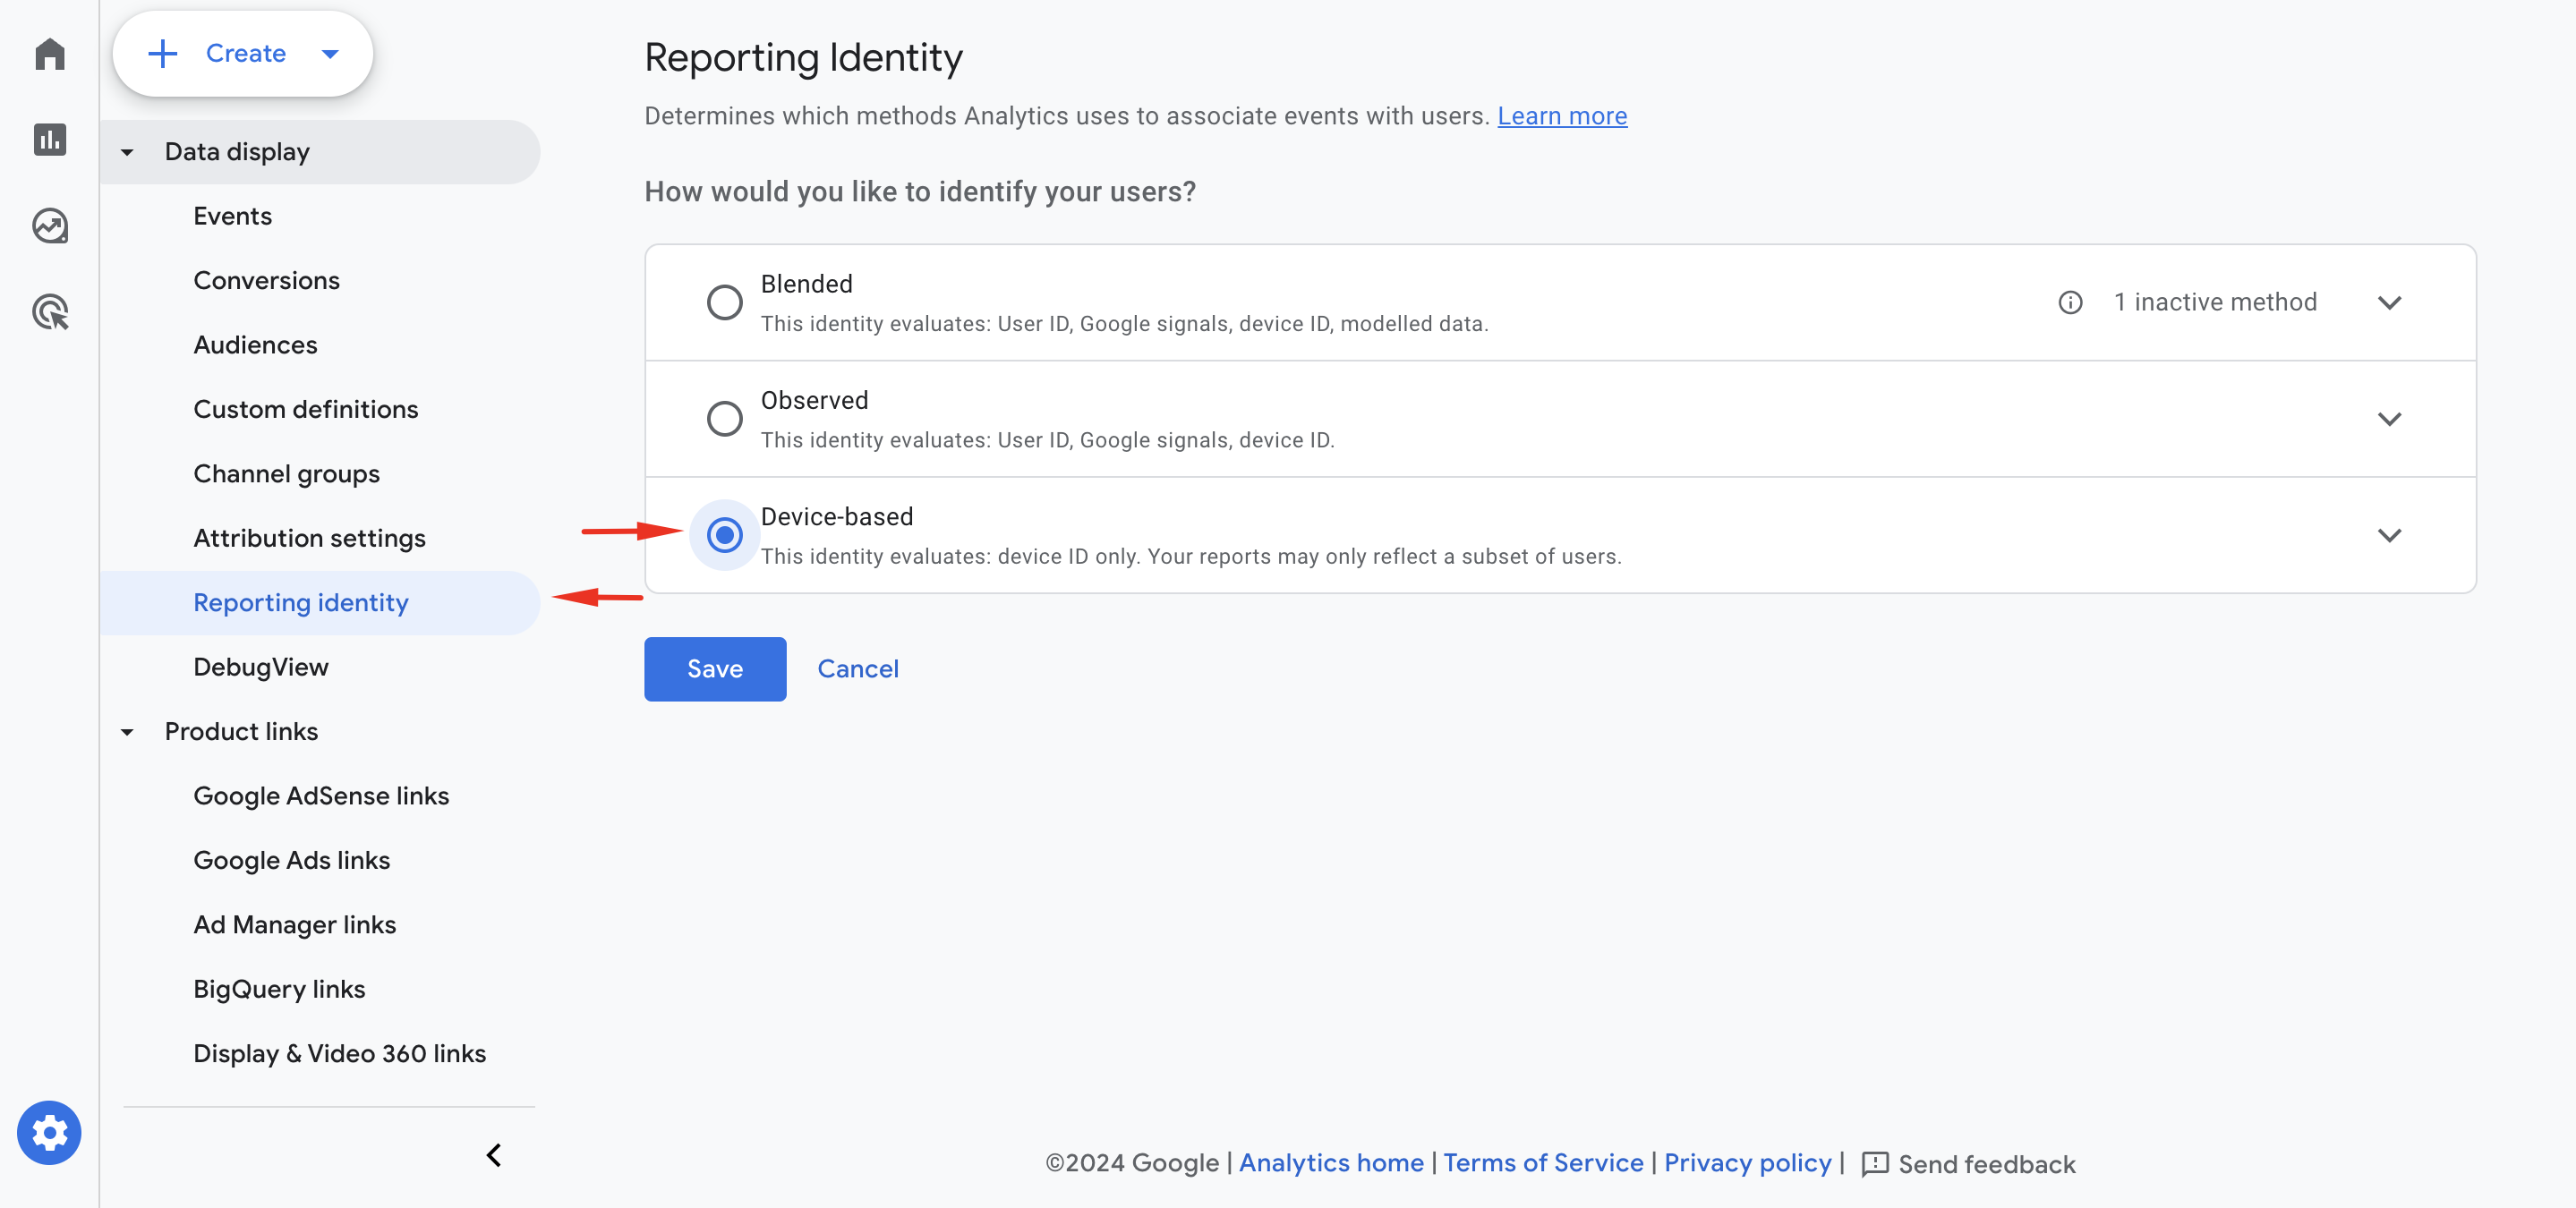 Switch the Reporting Identity